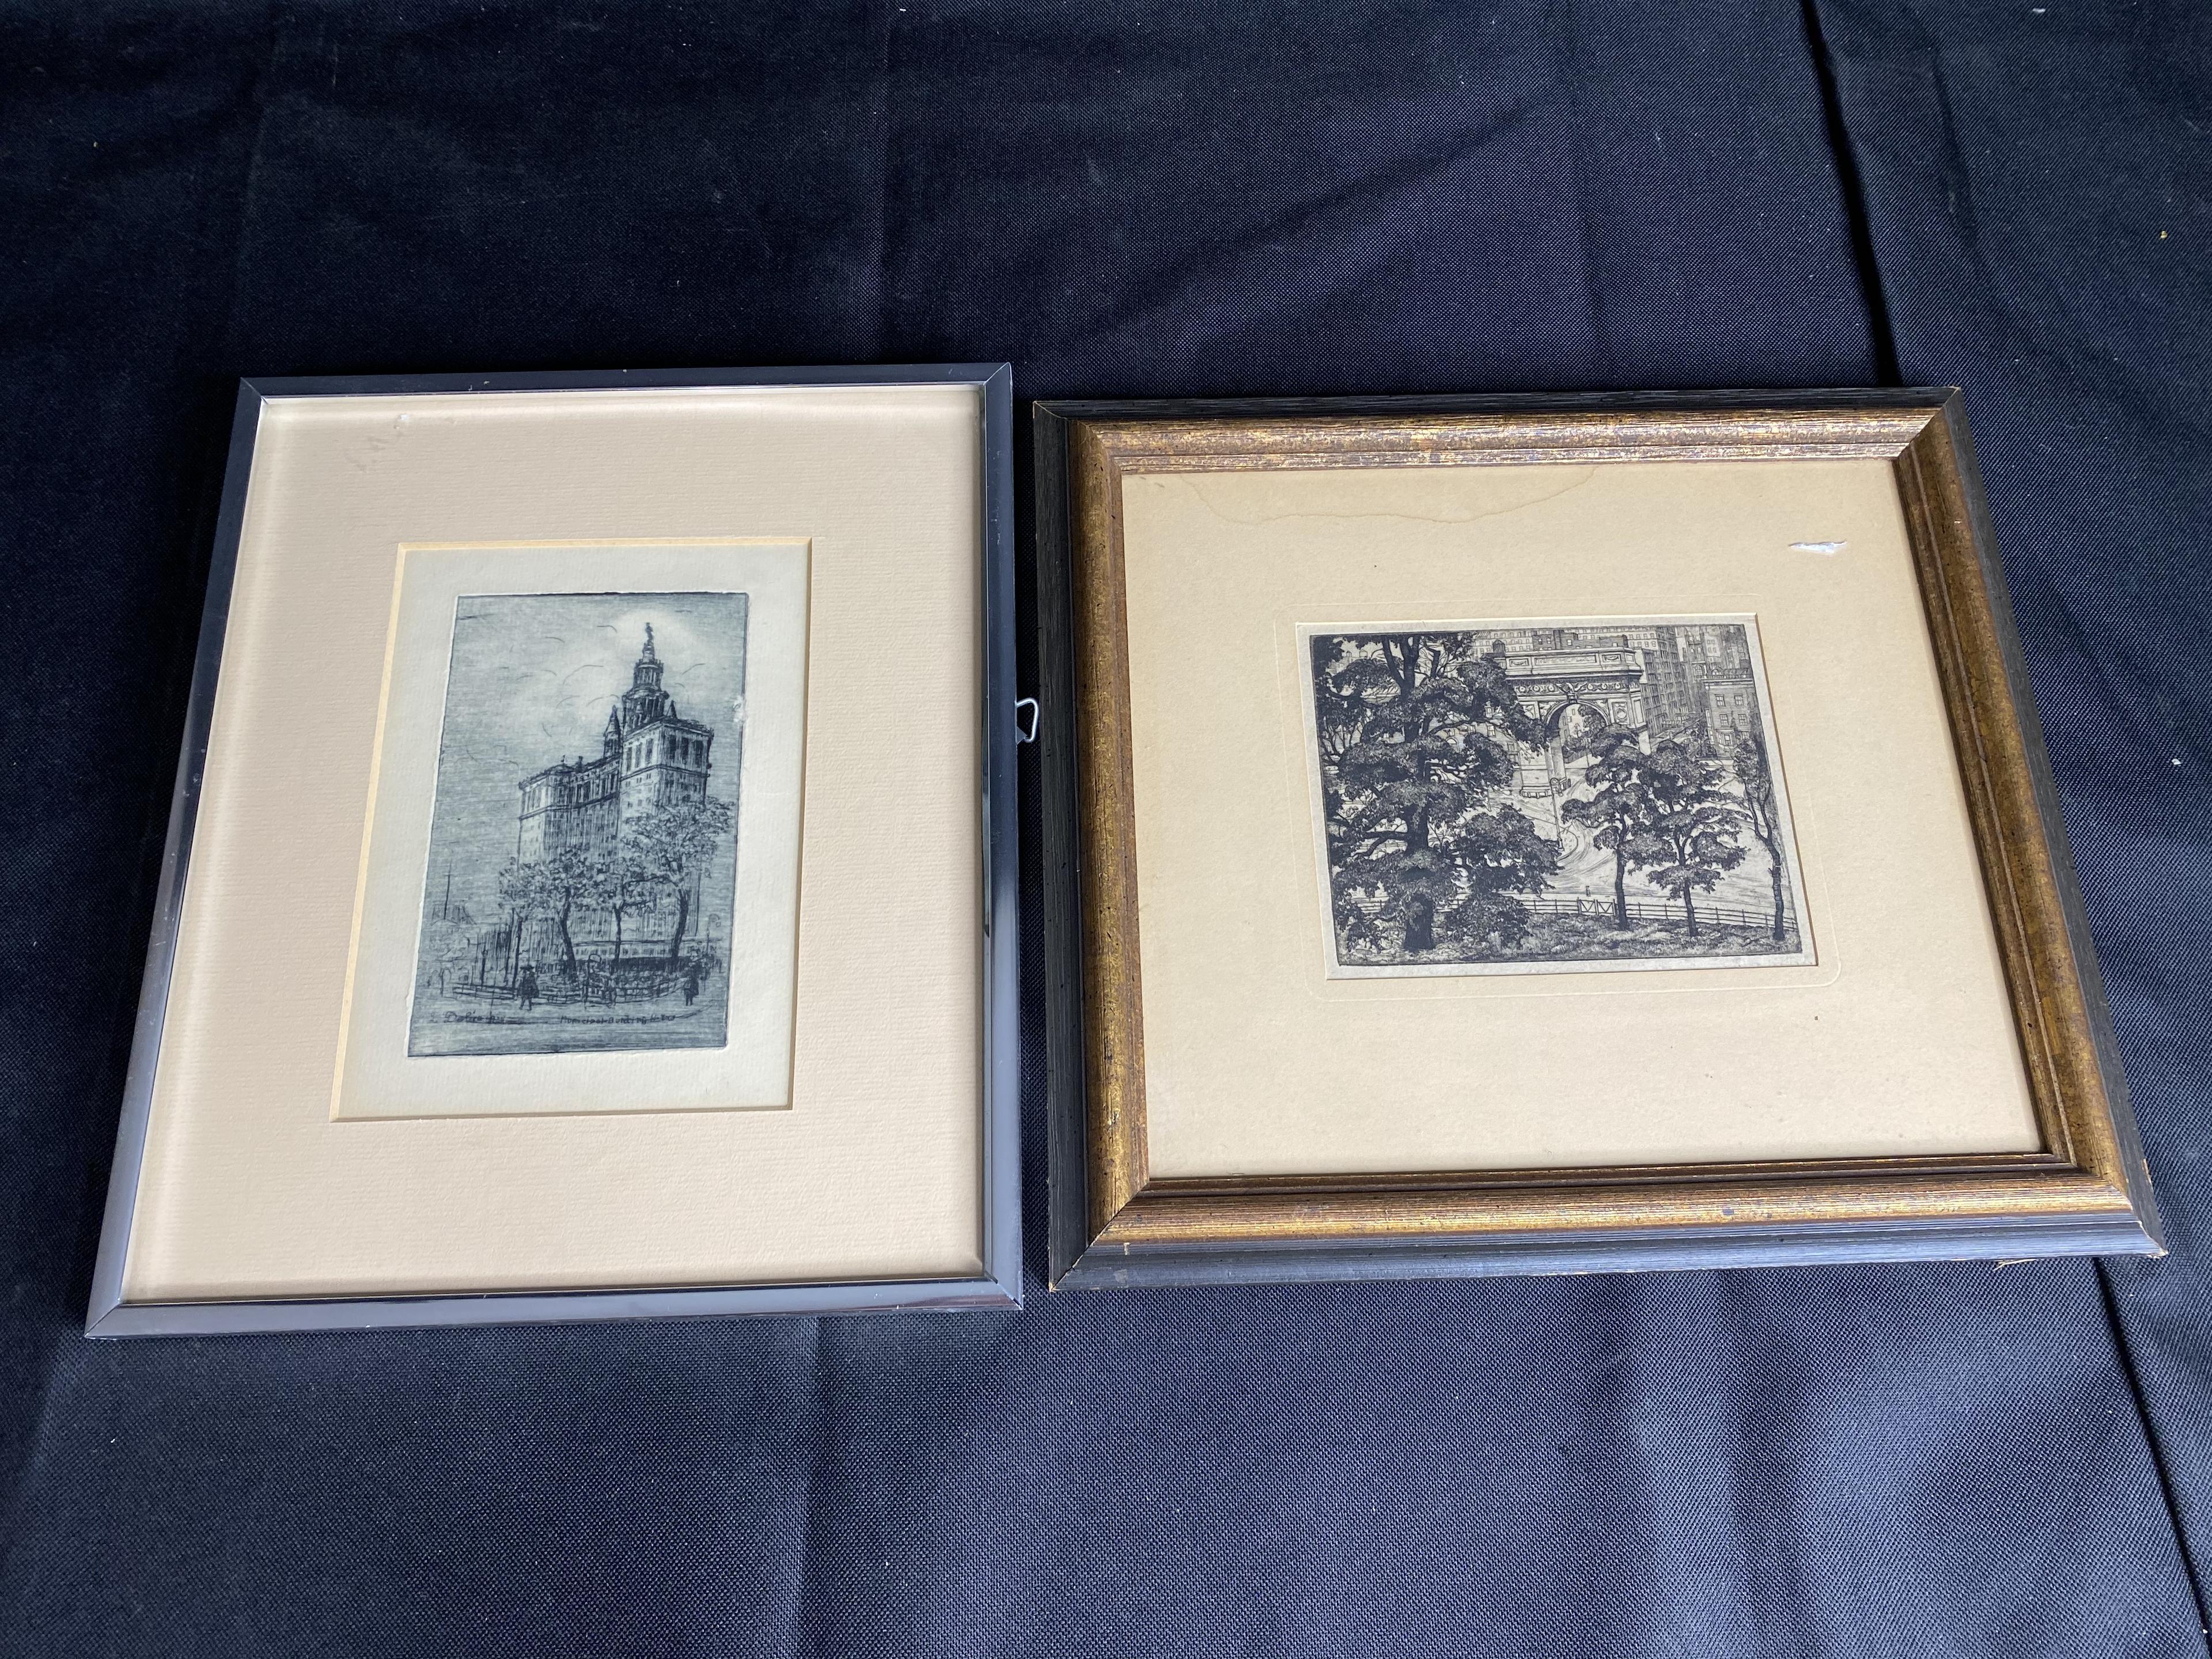 2 Antique Etchings by Luigi Lucioni and Leon Dolice